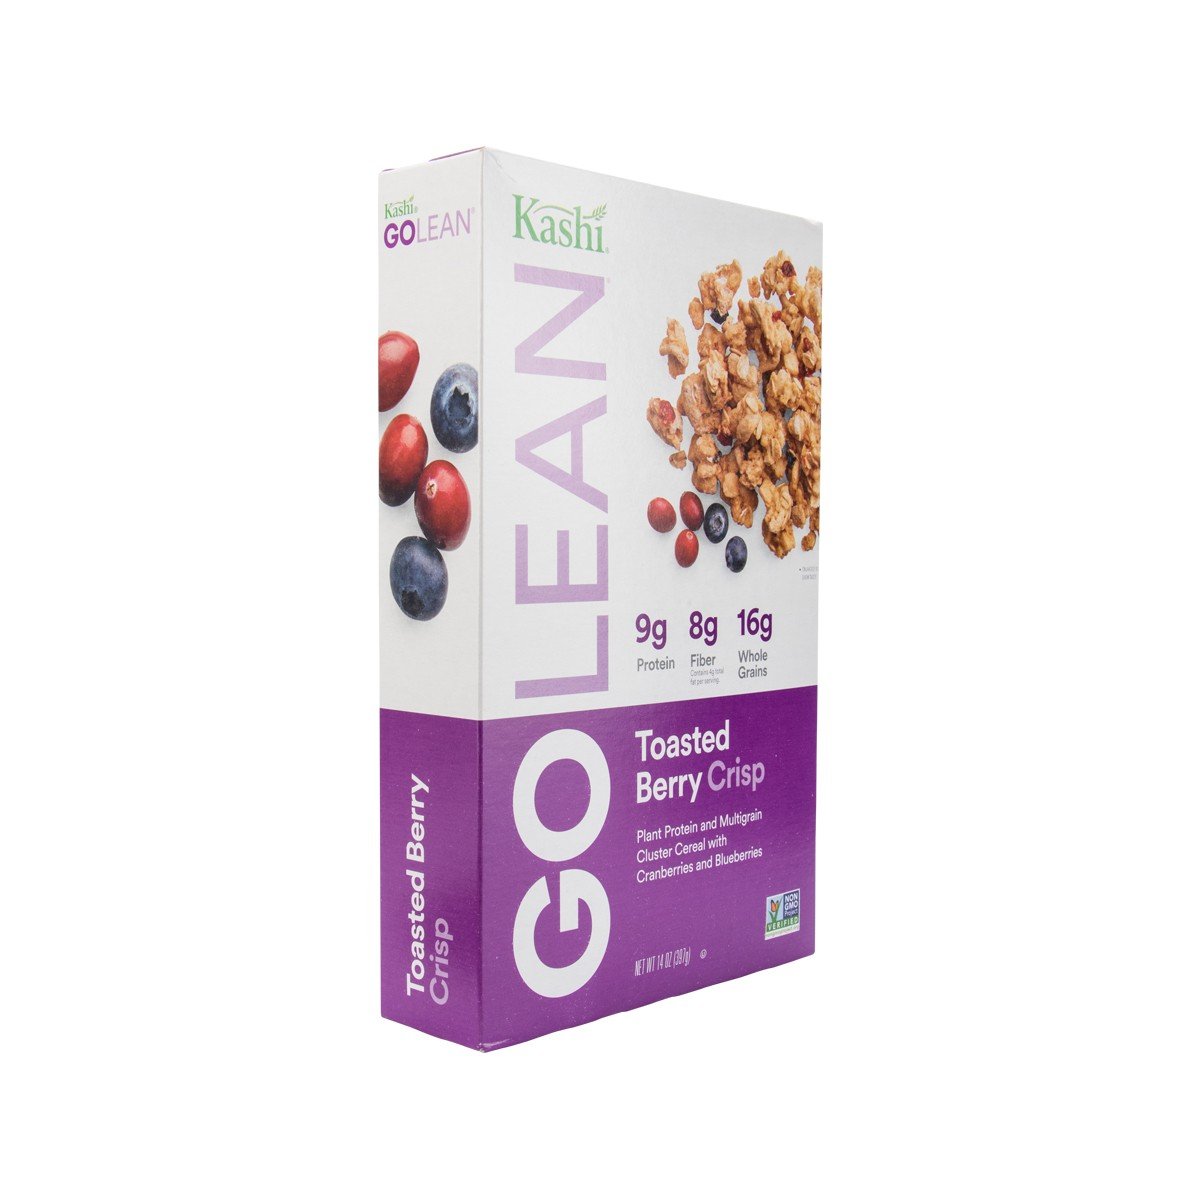 Kashi, GoLean Crisp! Cereal, Toasted Berry Crumble, 14 oz (397 g)